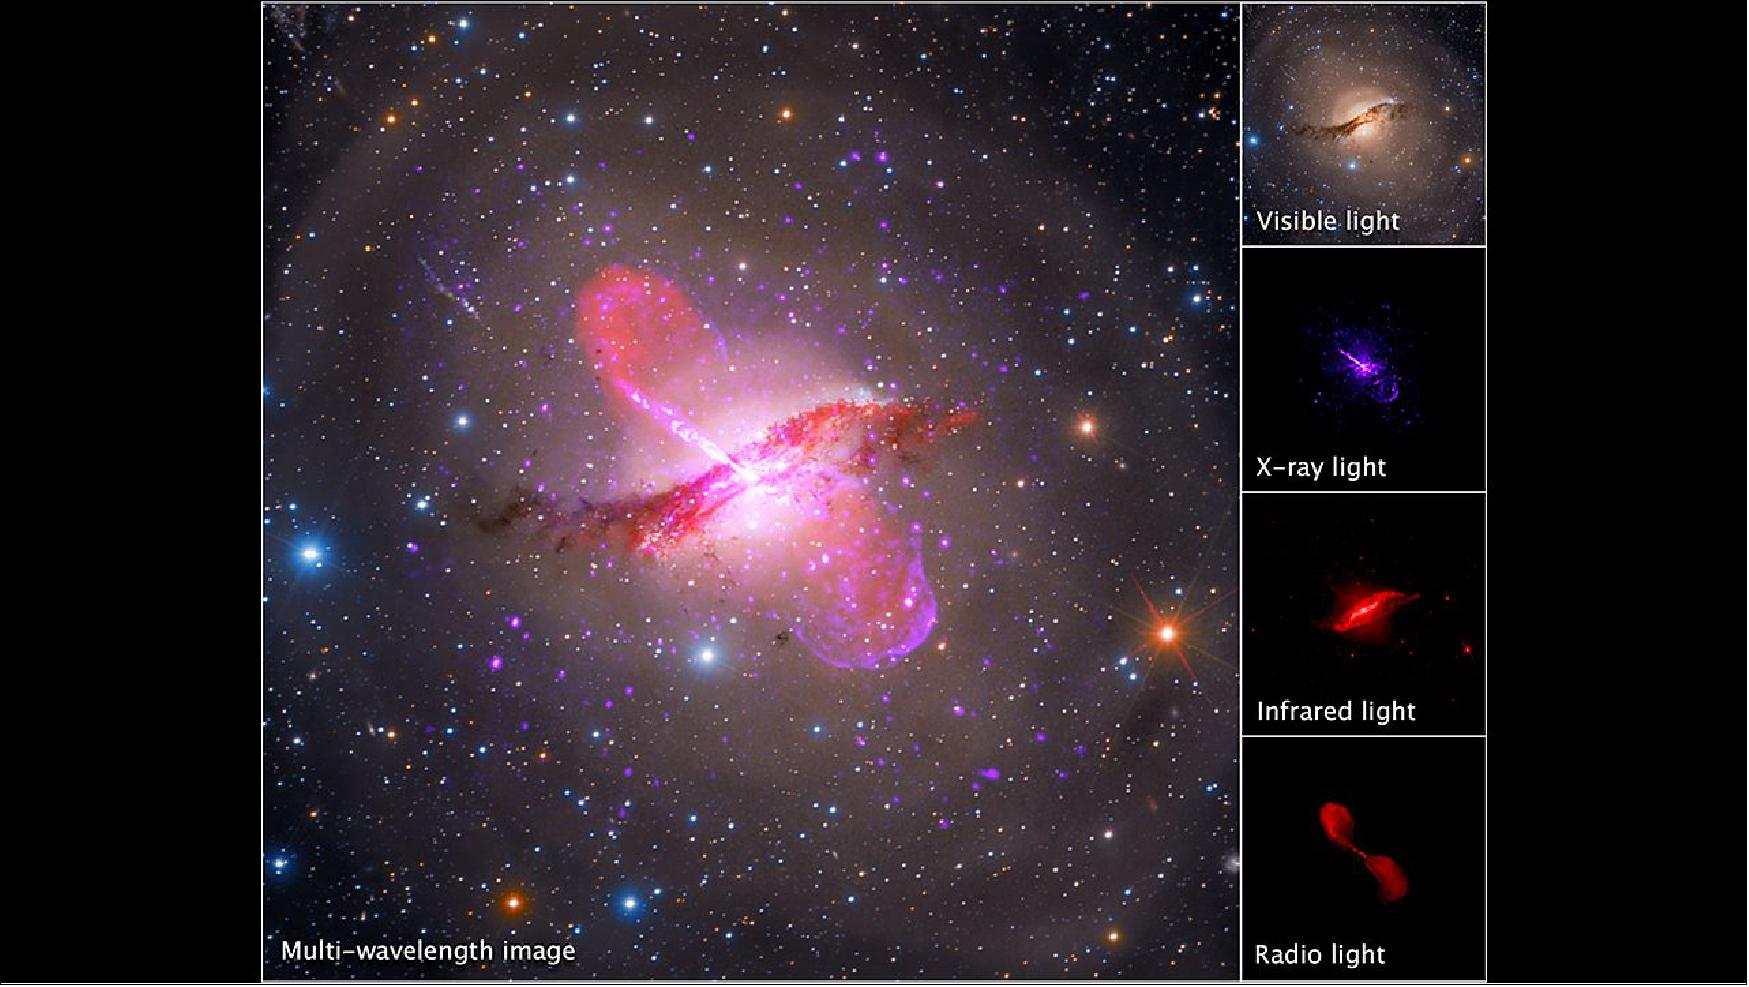 Figure 19: Centaurus A's dusty core is apparent in visible light, but its jets are best viewed in X-ray and radio light. With upcoming observations from NASA's James Webb Space Telescope in infrared light, researchers hope to better pinpoint the mass of the galaxy's central supermassive black hole as well as evidence that shows where the jets were ejected [image credit: X-ray: NASA/CXC/SAO; Optical: Rolf Olsen; Infrared: NASA/JPL-Caltech; Radio: NRAO/AUI/NSF/Univ.Hertfordshire/M.Hardcastle]